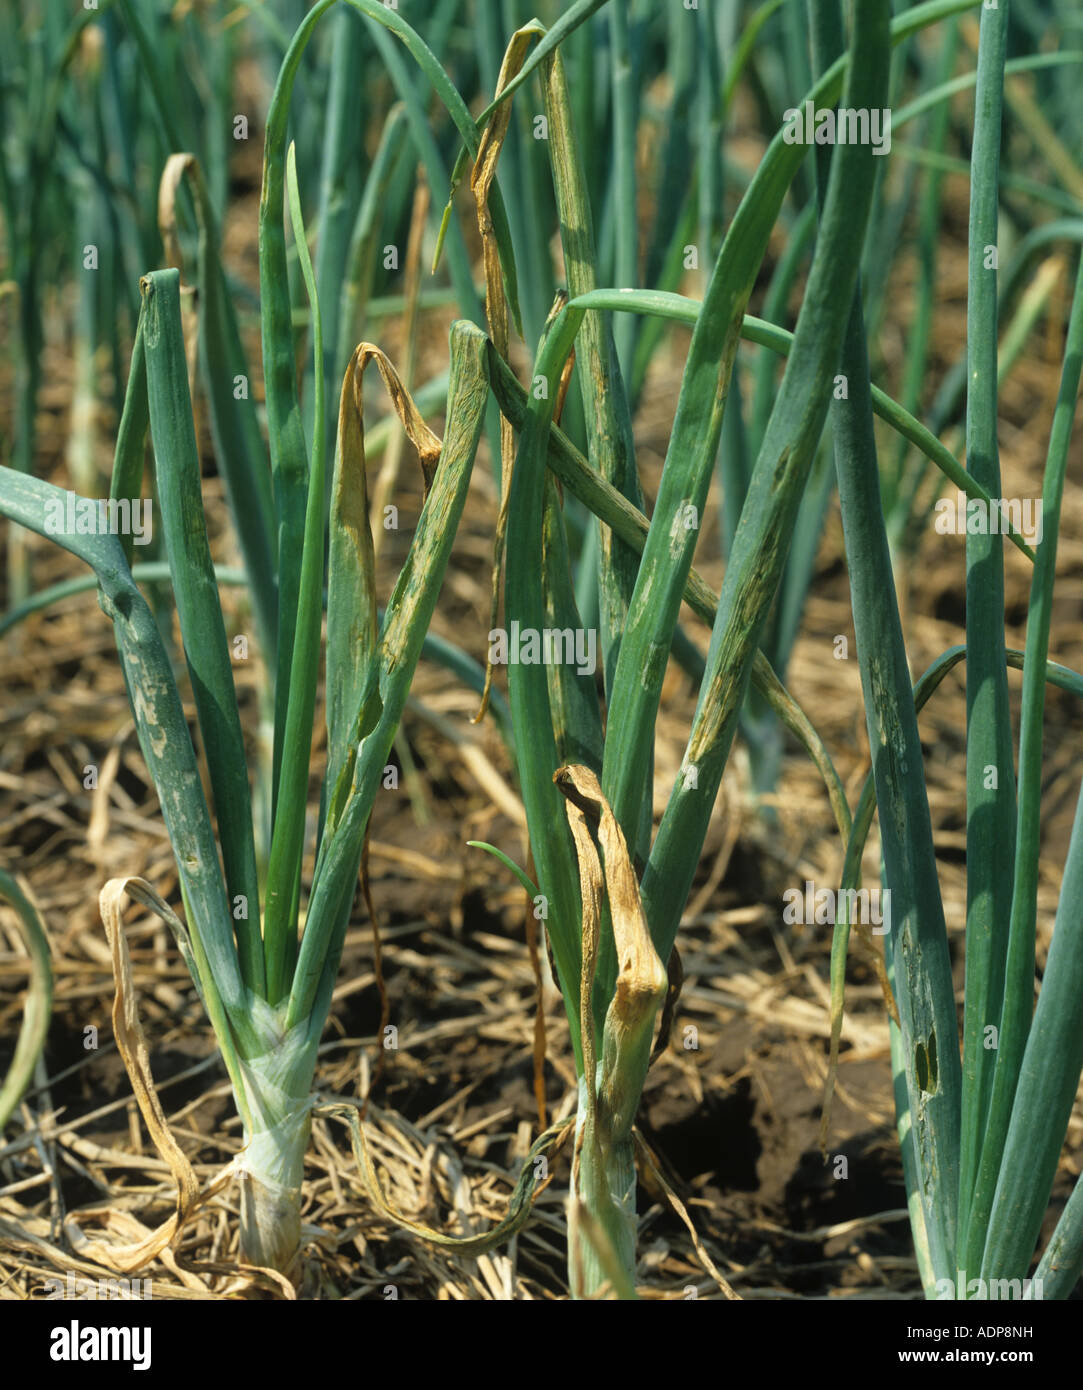 Onion crop with bacterial blight Xanthomonas campestris disease damage Thailand Stock Photo